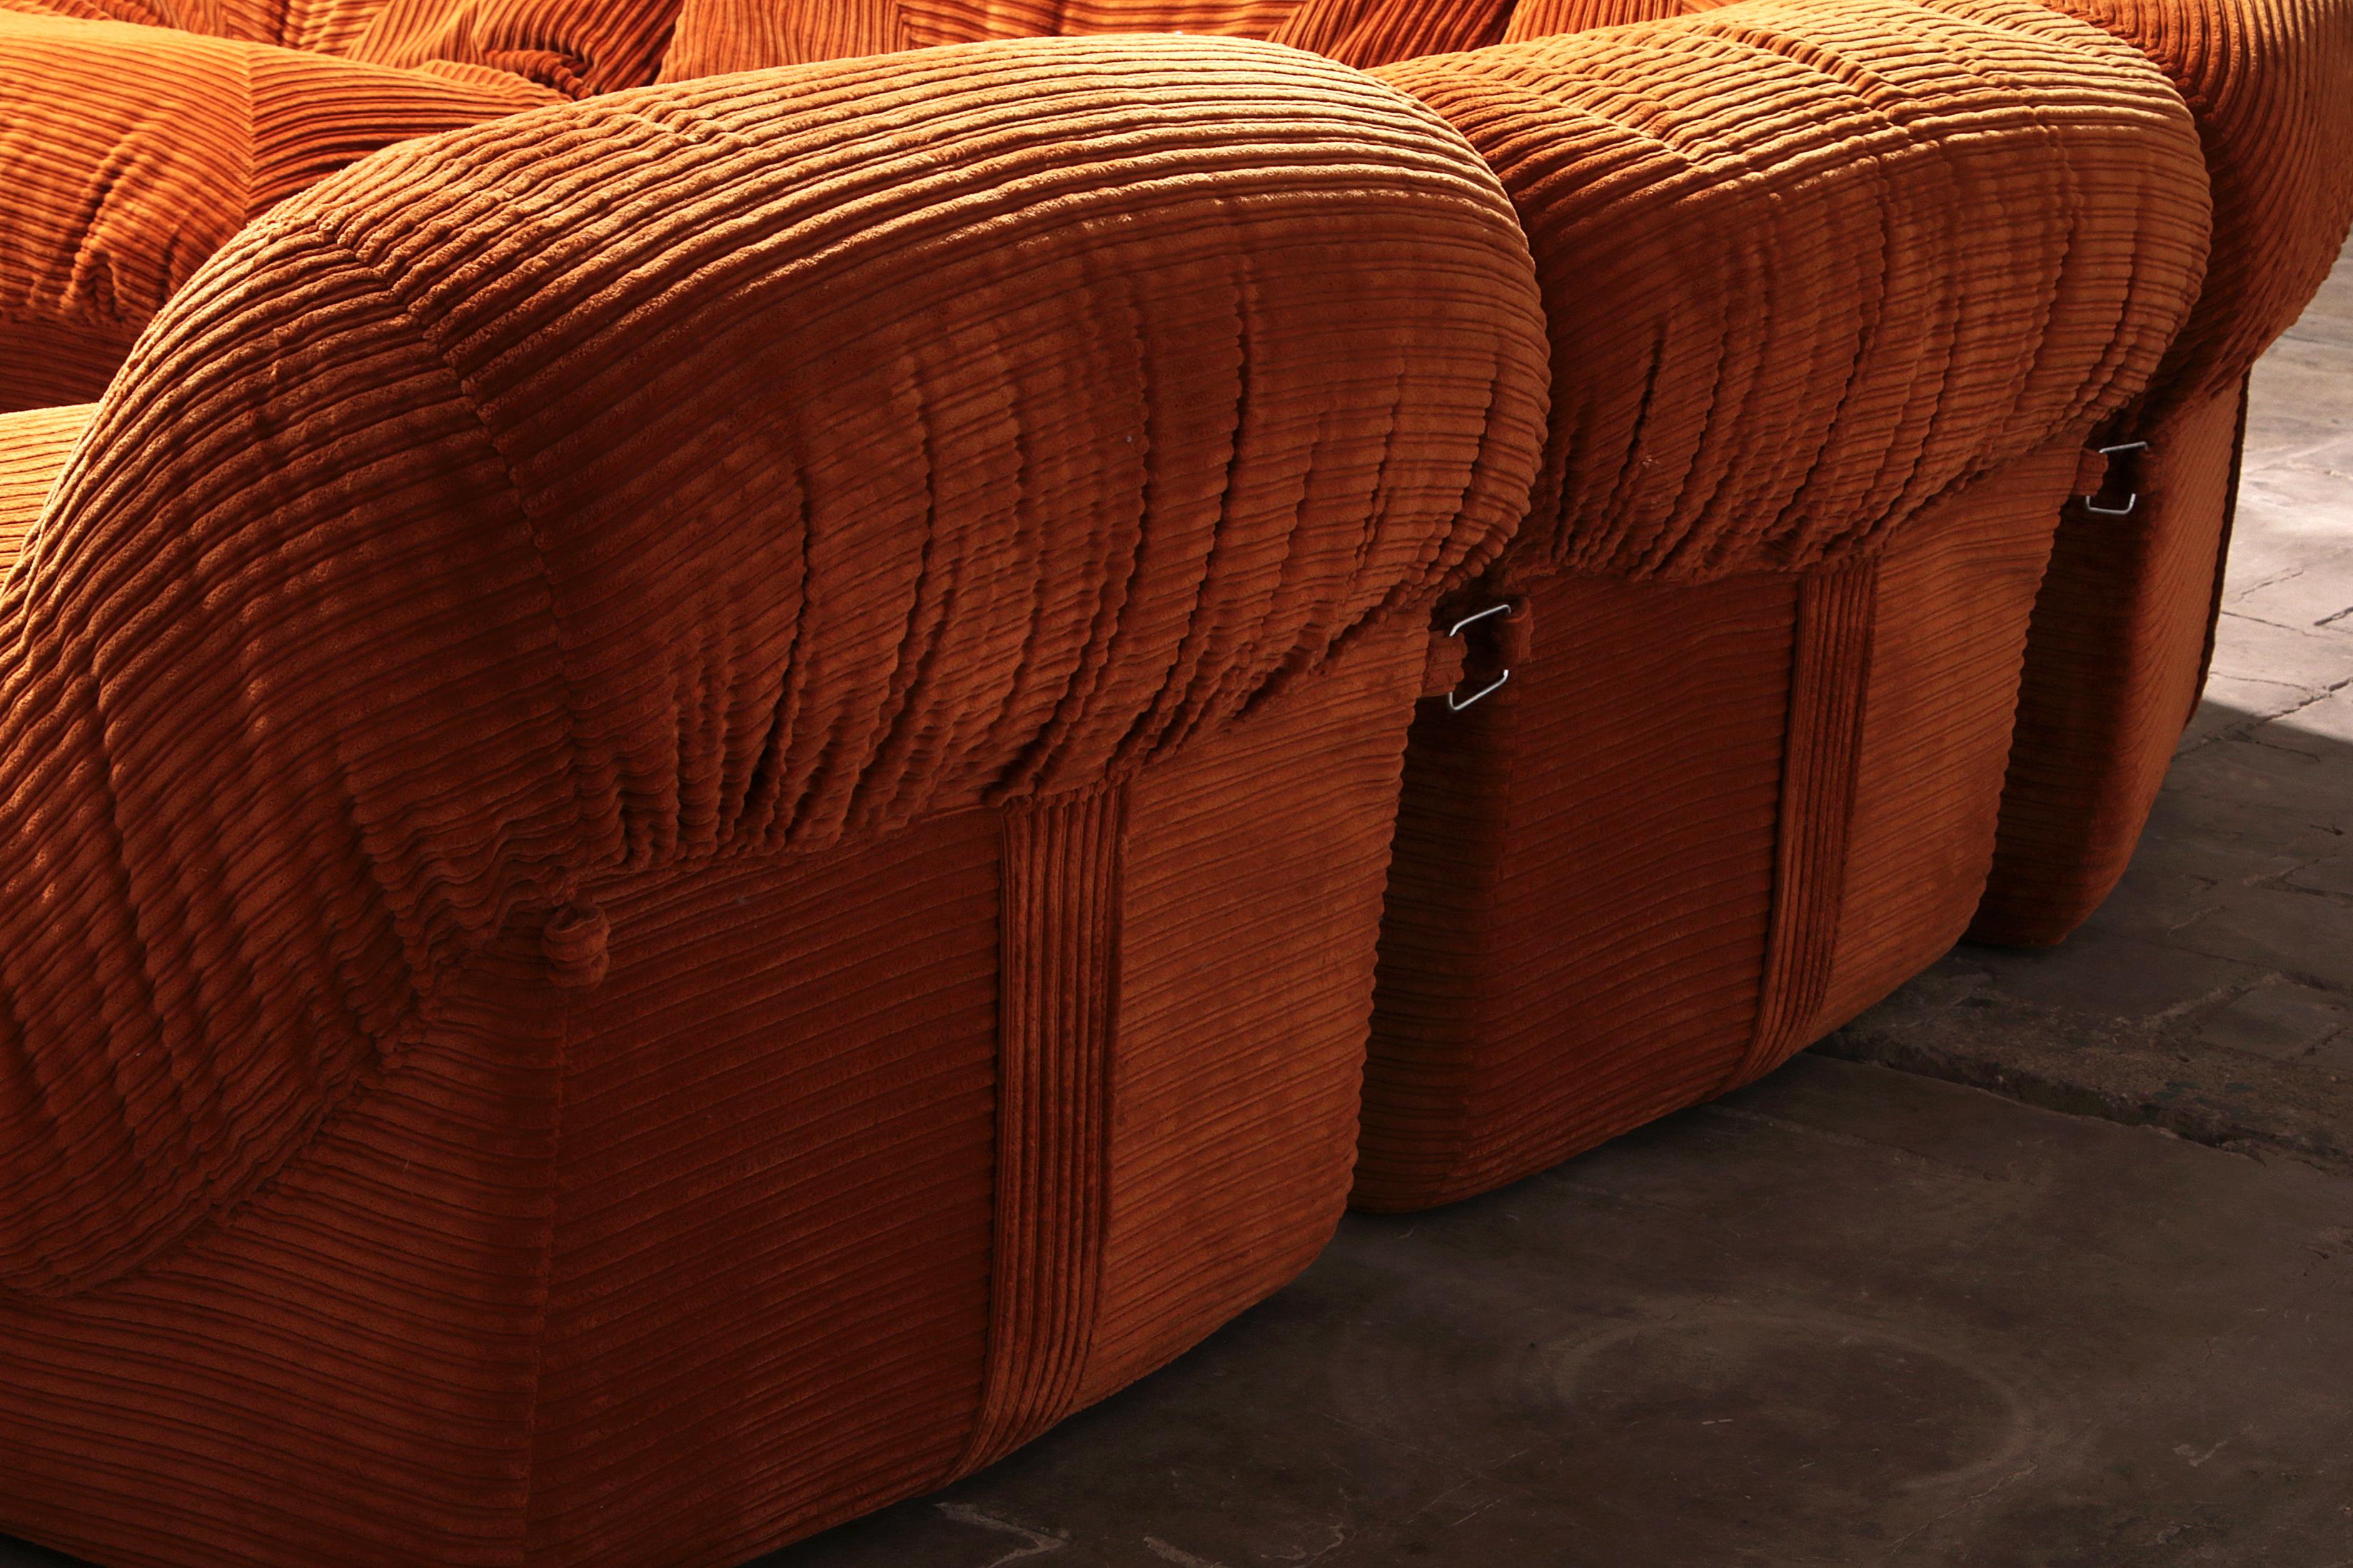 red corduroy couch